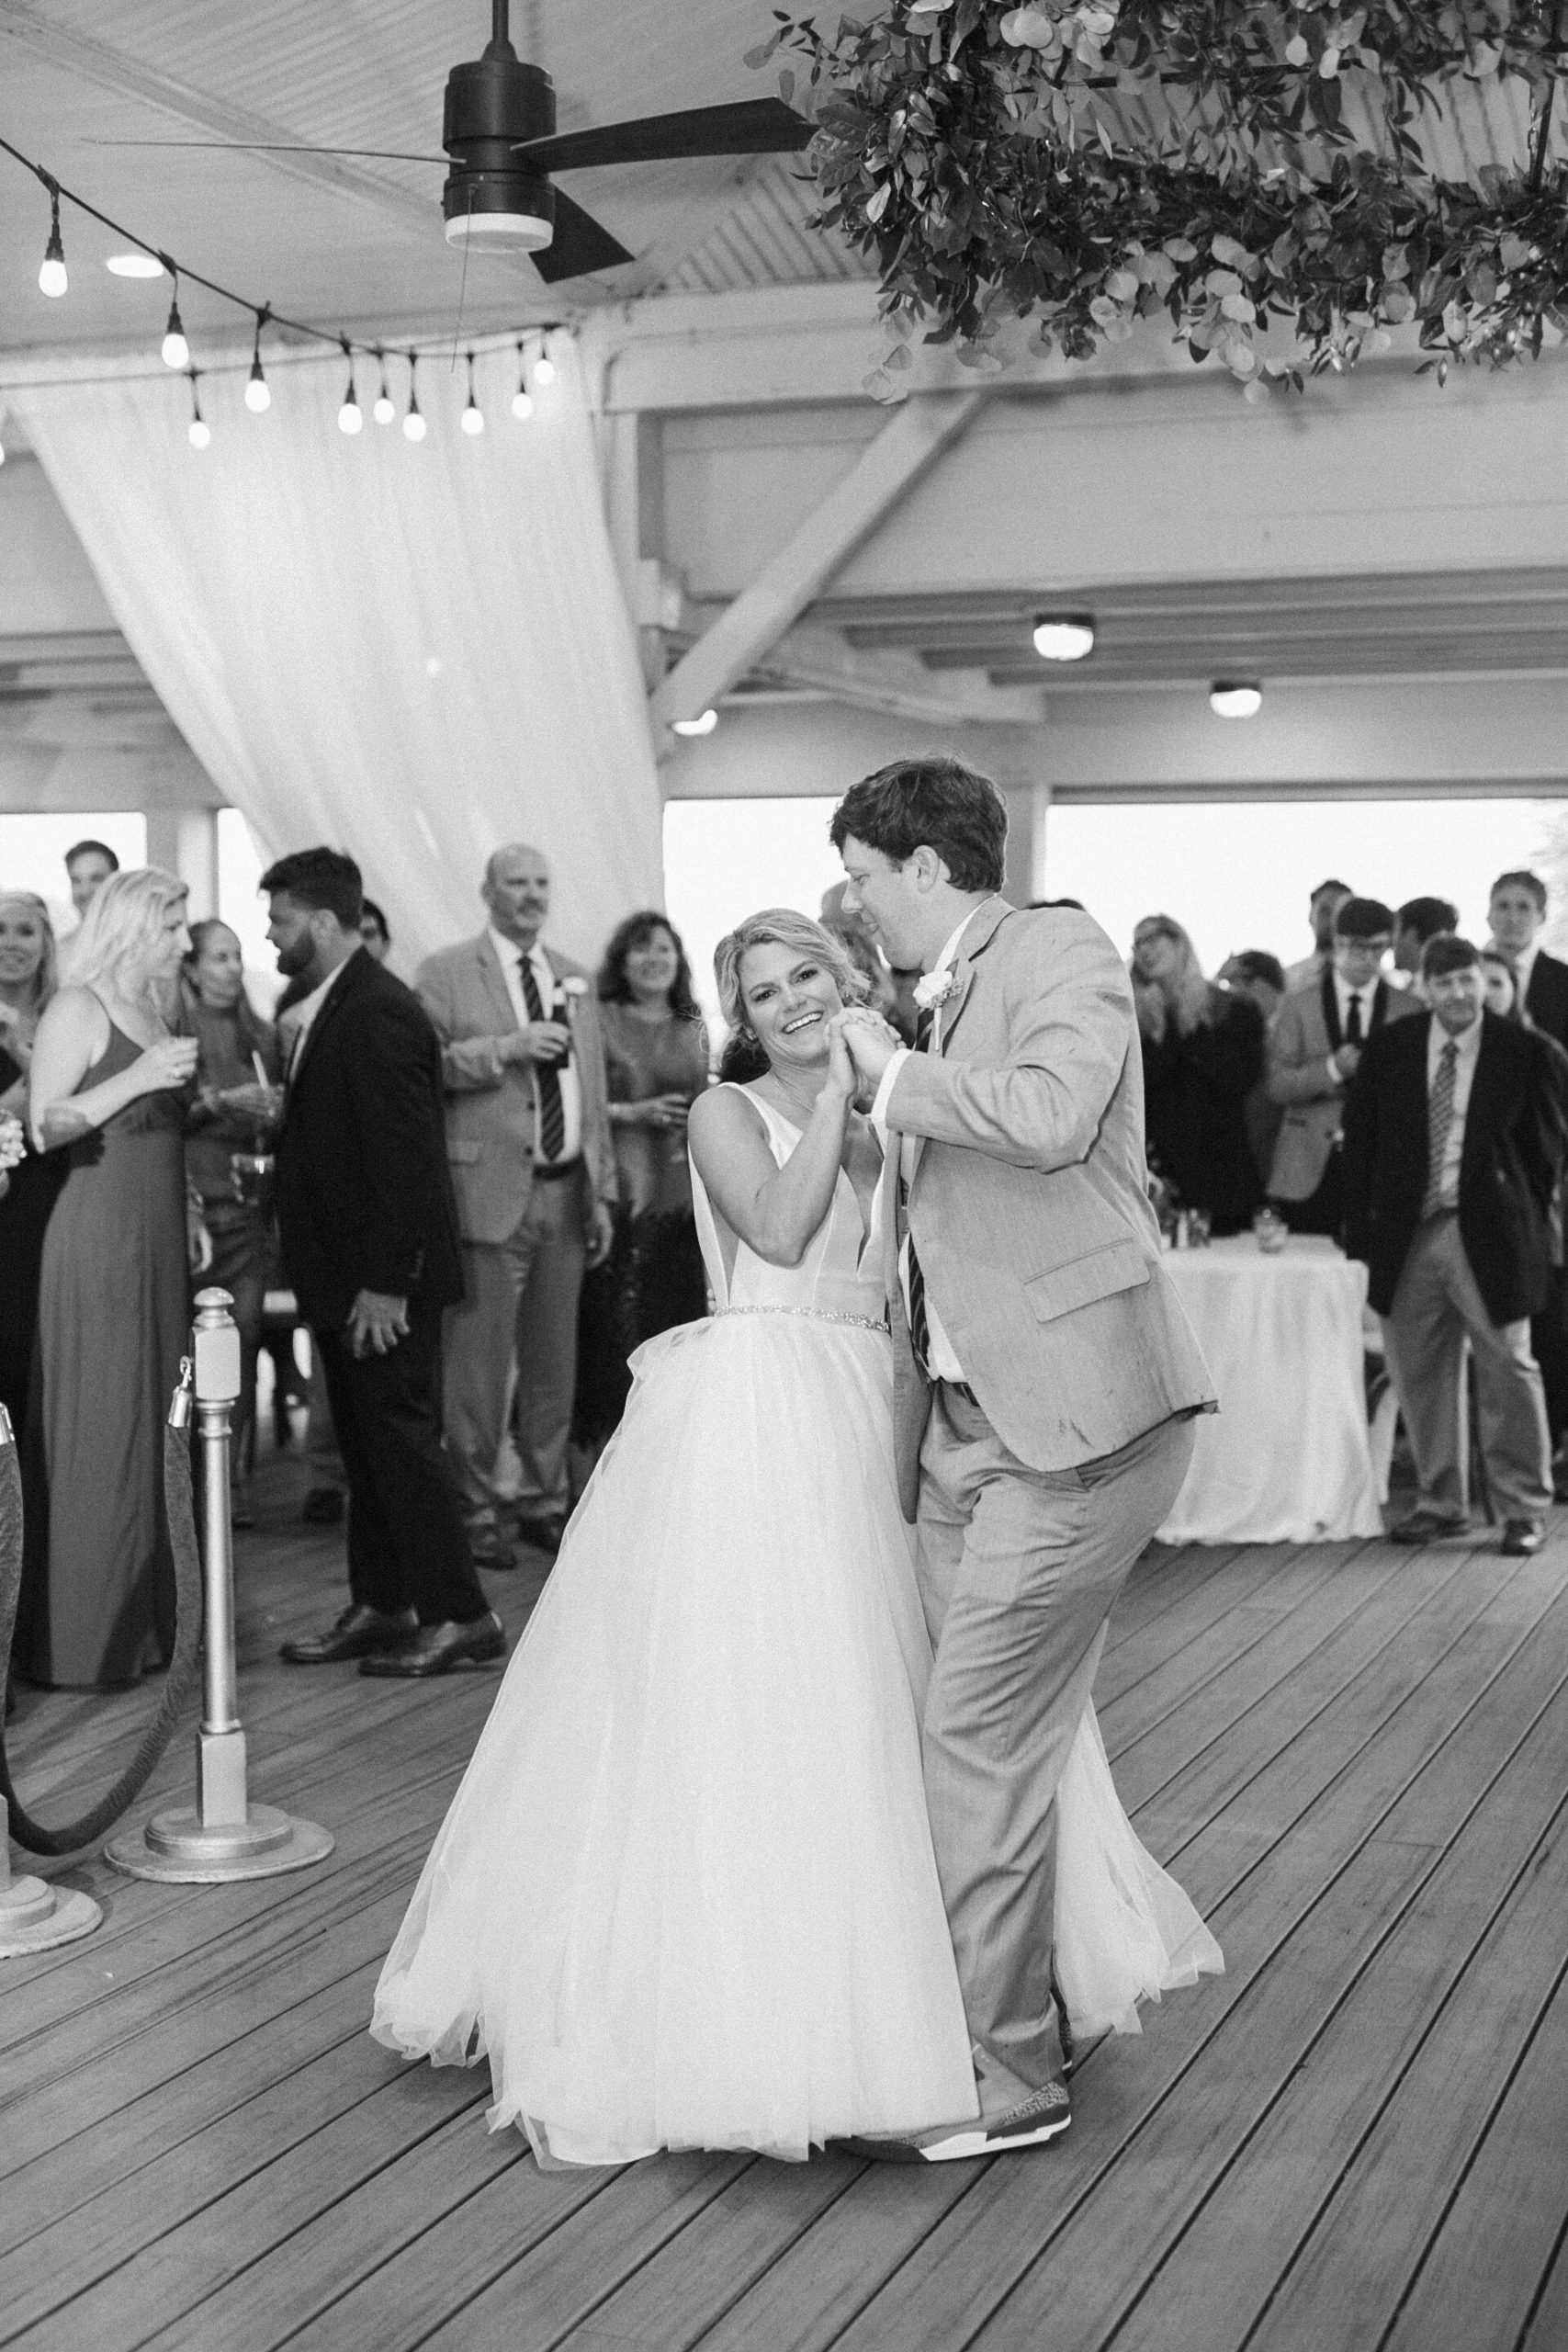 Bride and groom share first dance at Hilton Head Island, South Carolina oceanfront wedding.